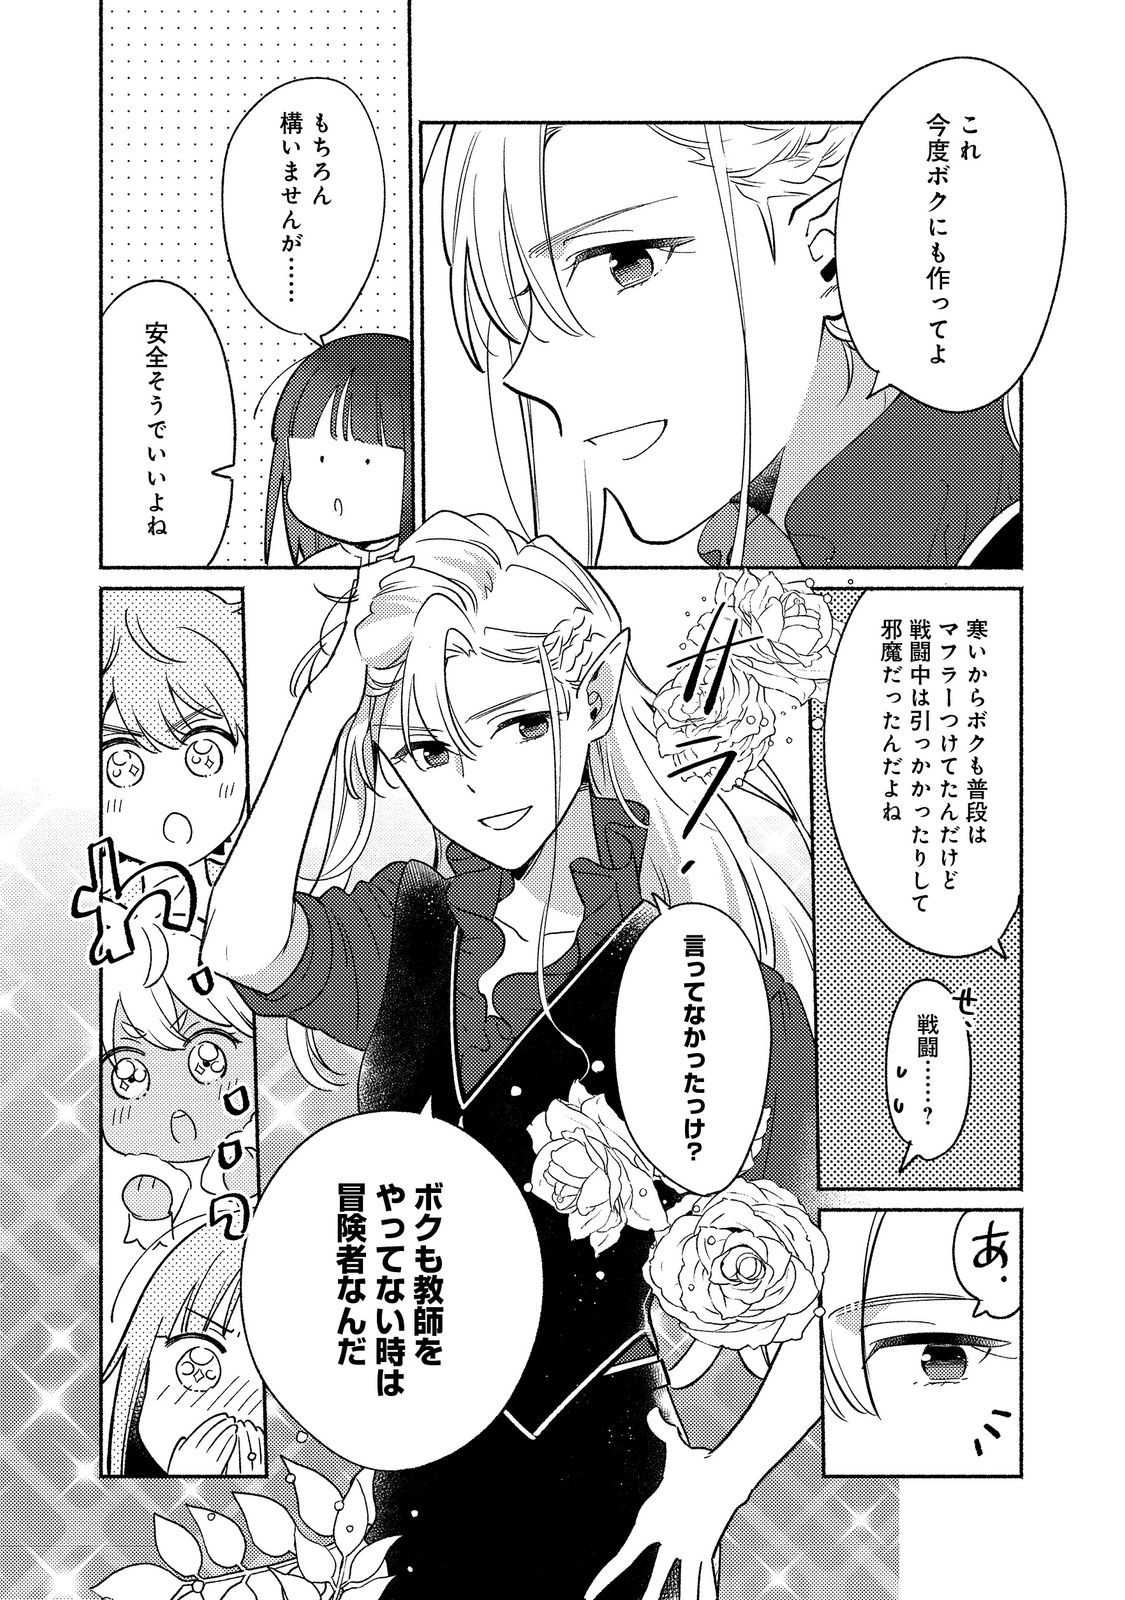 I’m the White Pig Nobleman 第20.1話 - Page 12